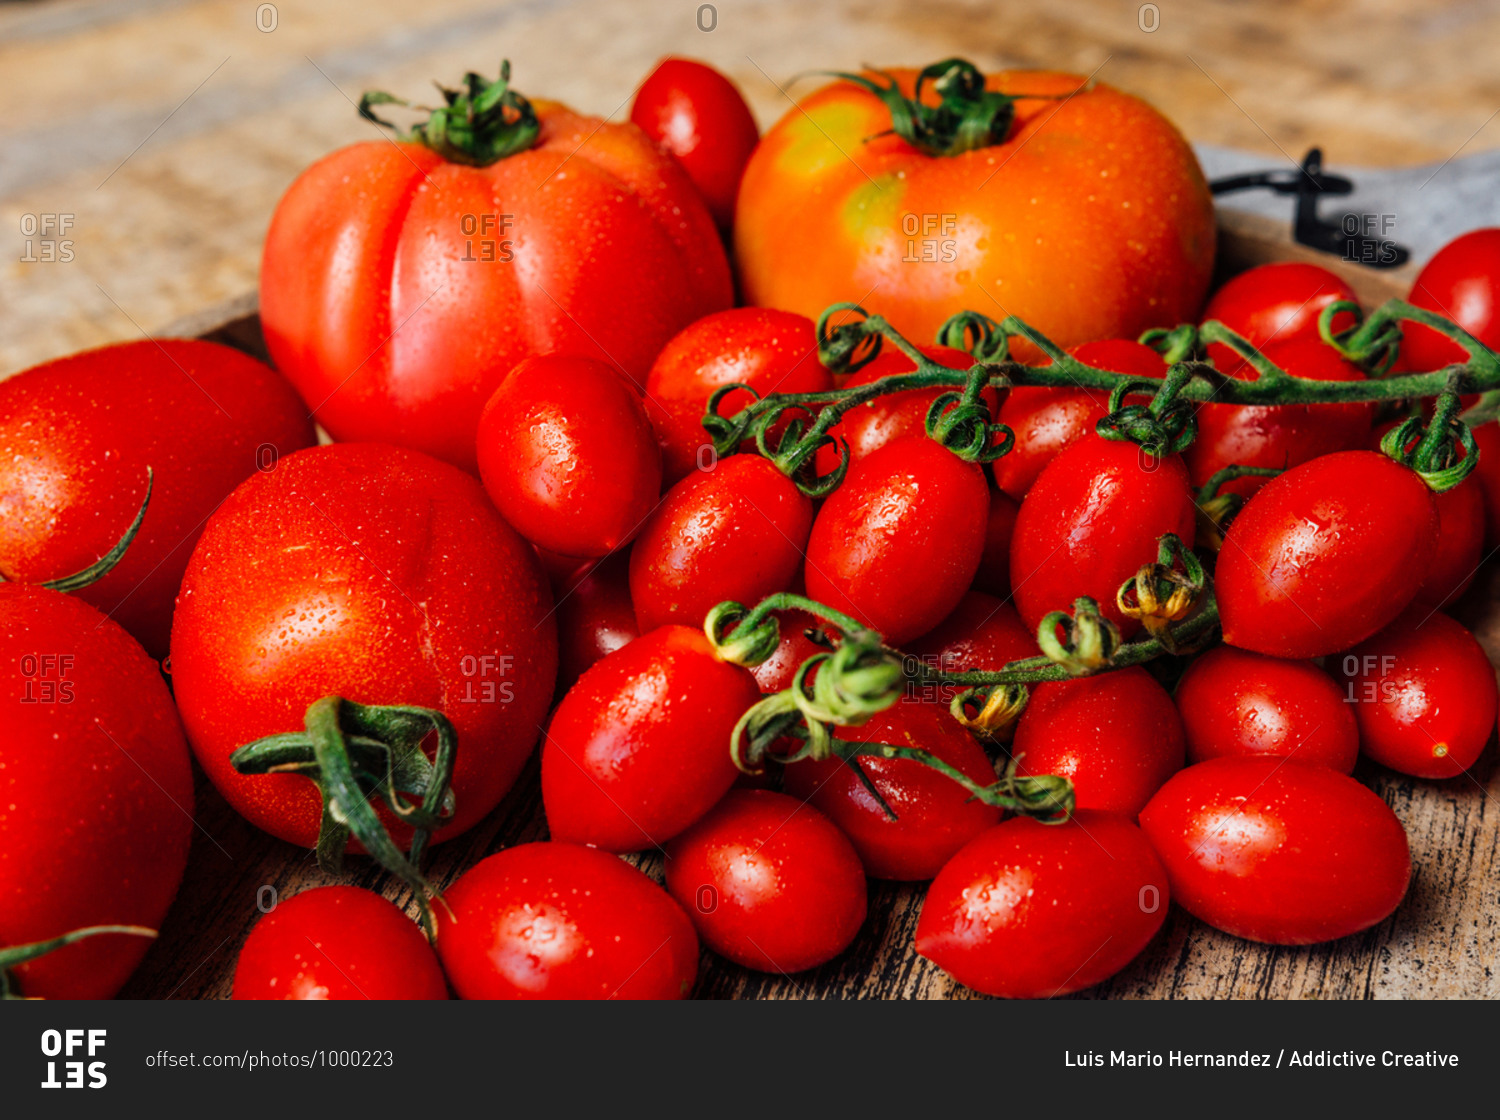 Top view of various types of fresh ripe red tomatoes on wooden tray arranged on rustic wooden table with cloth